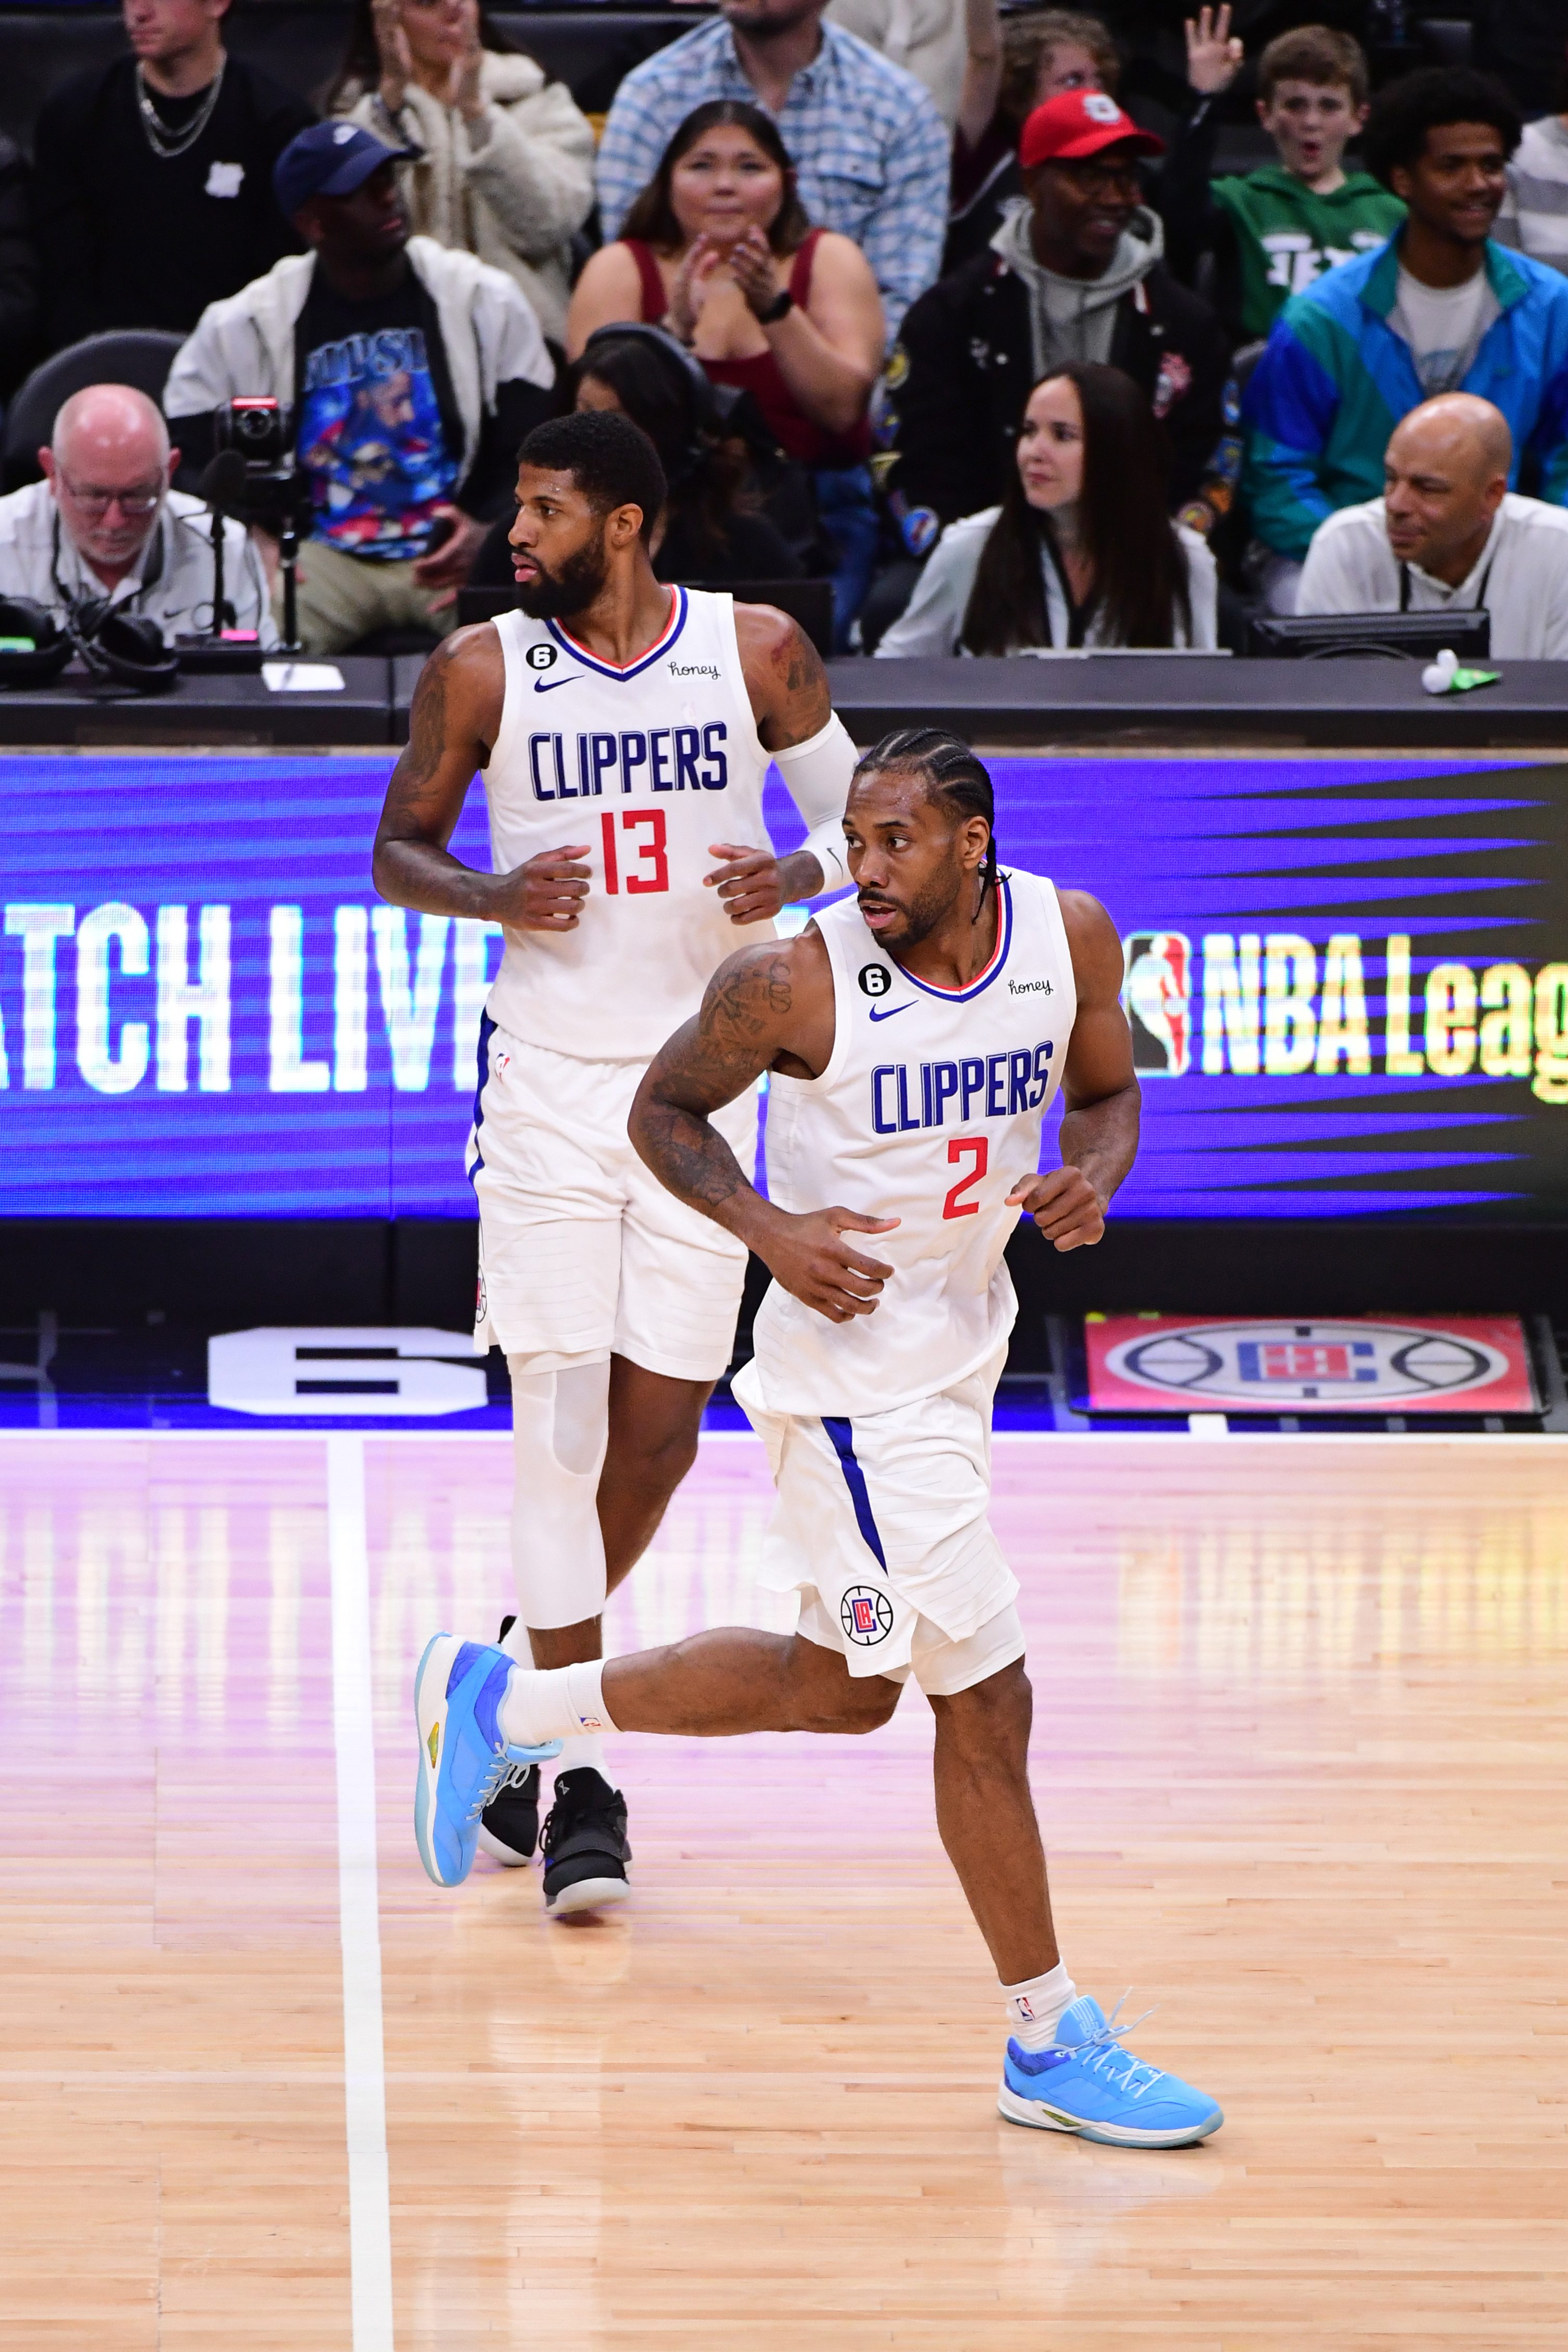 Clippers' Paul George Says He's 'More Focused' Than Ever Ahead of